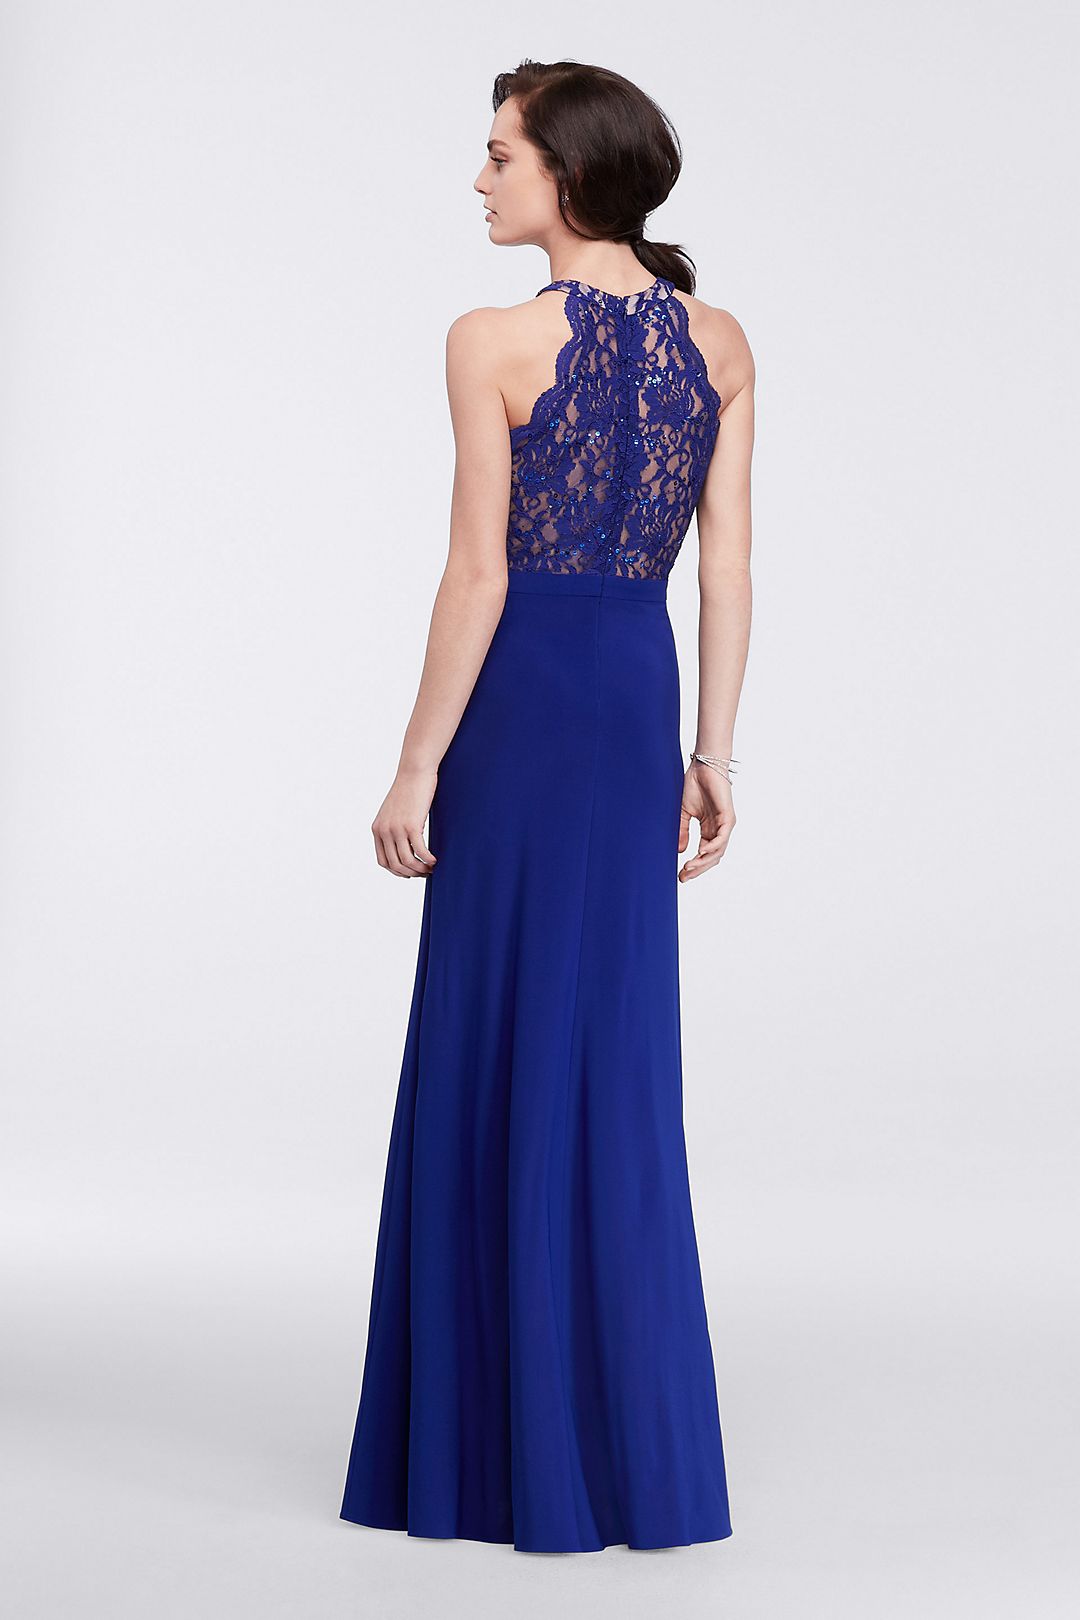 Long Halter Lace Dress with Illusion Keyhole Image 2